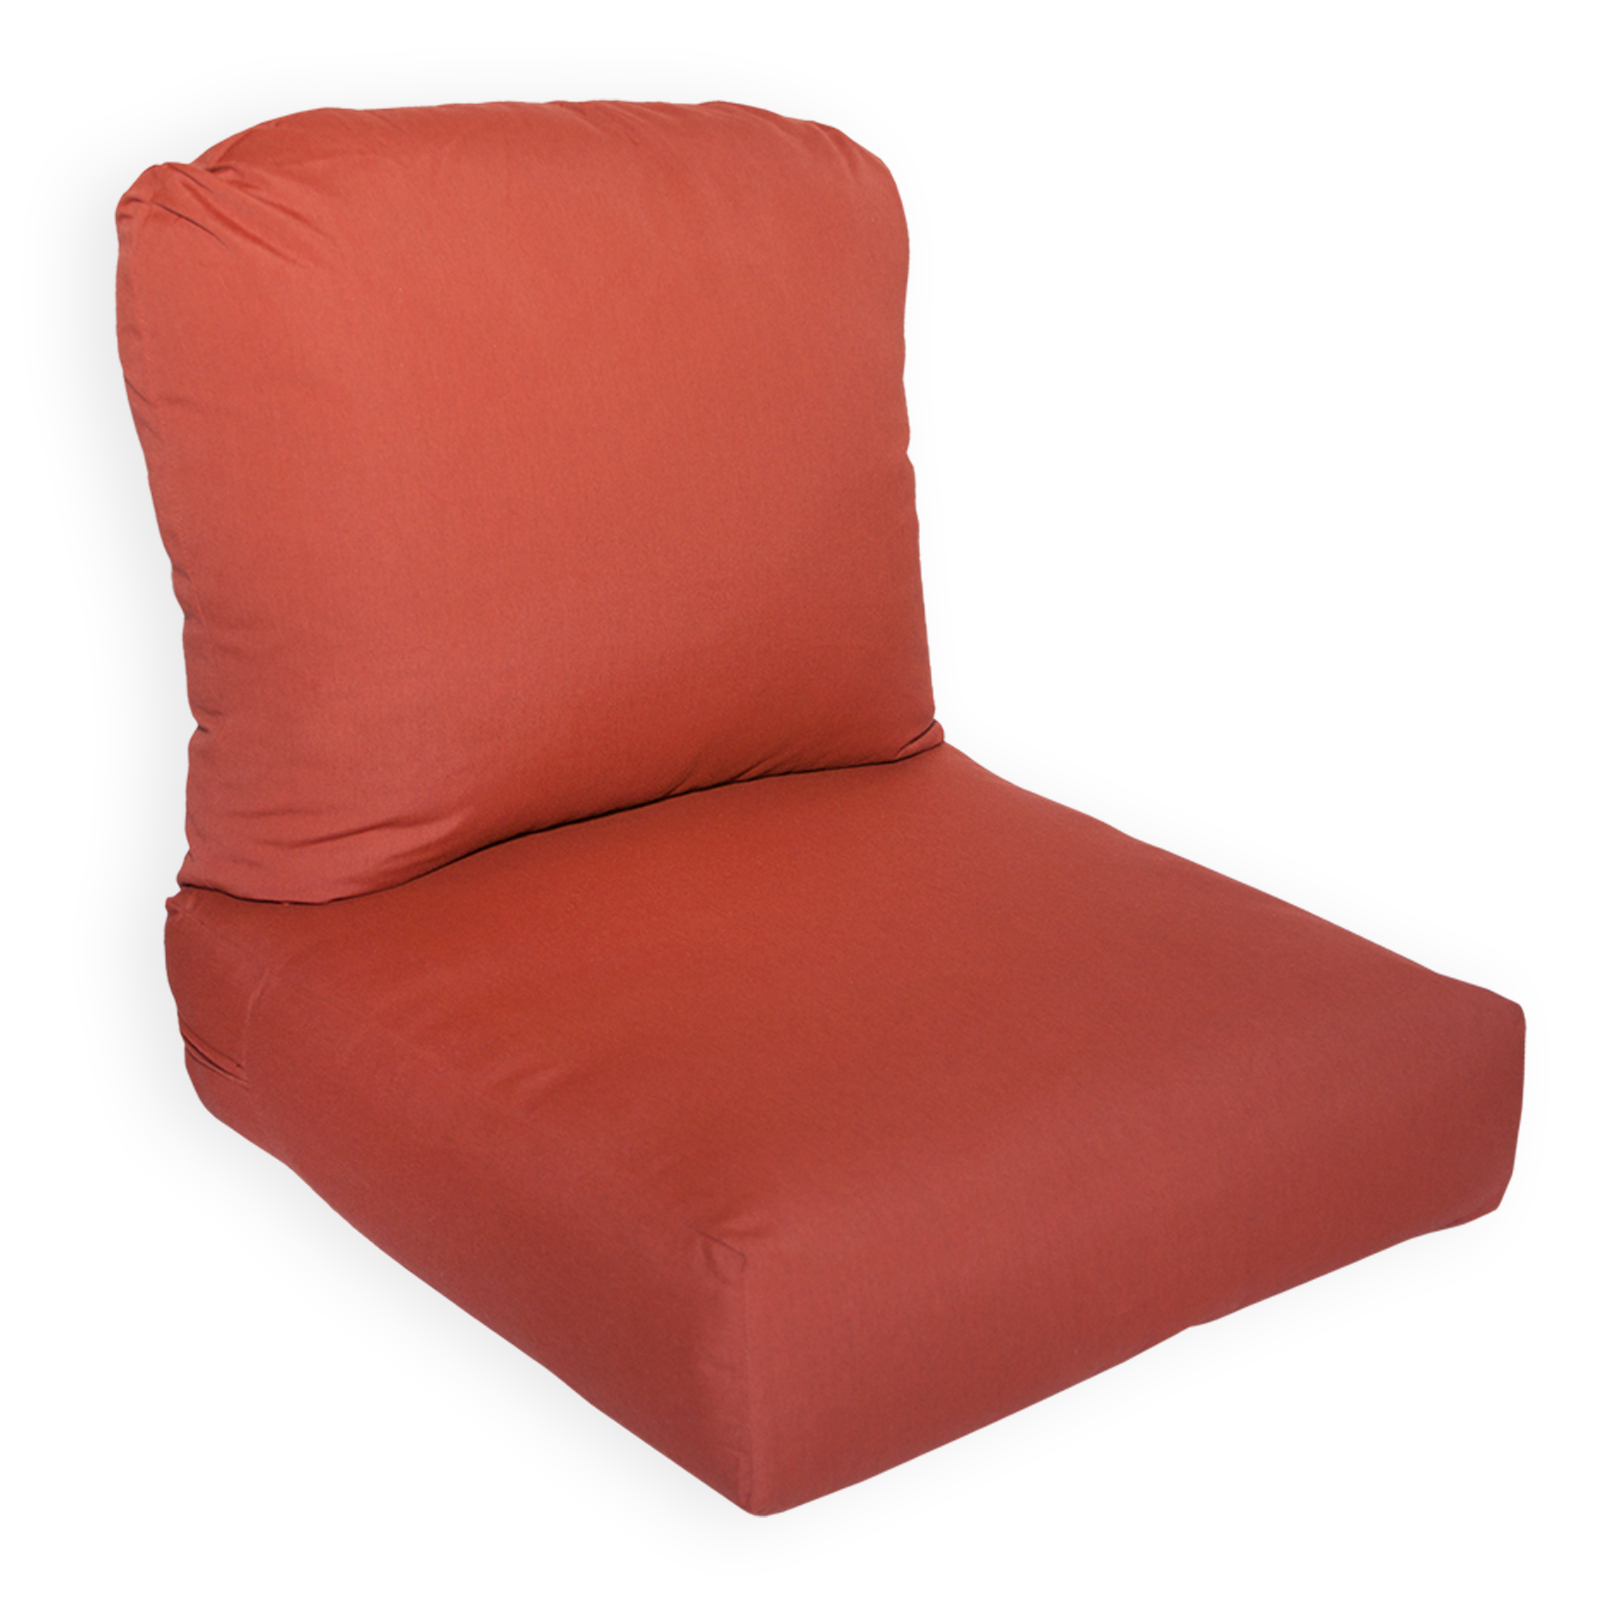 Deluxe Deep Seating Chair Cushion available in Canvas Henna, Spectrum Sand, and Canvas Cork